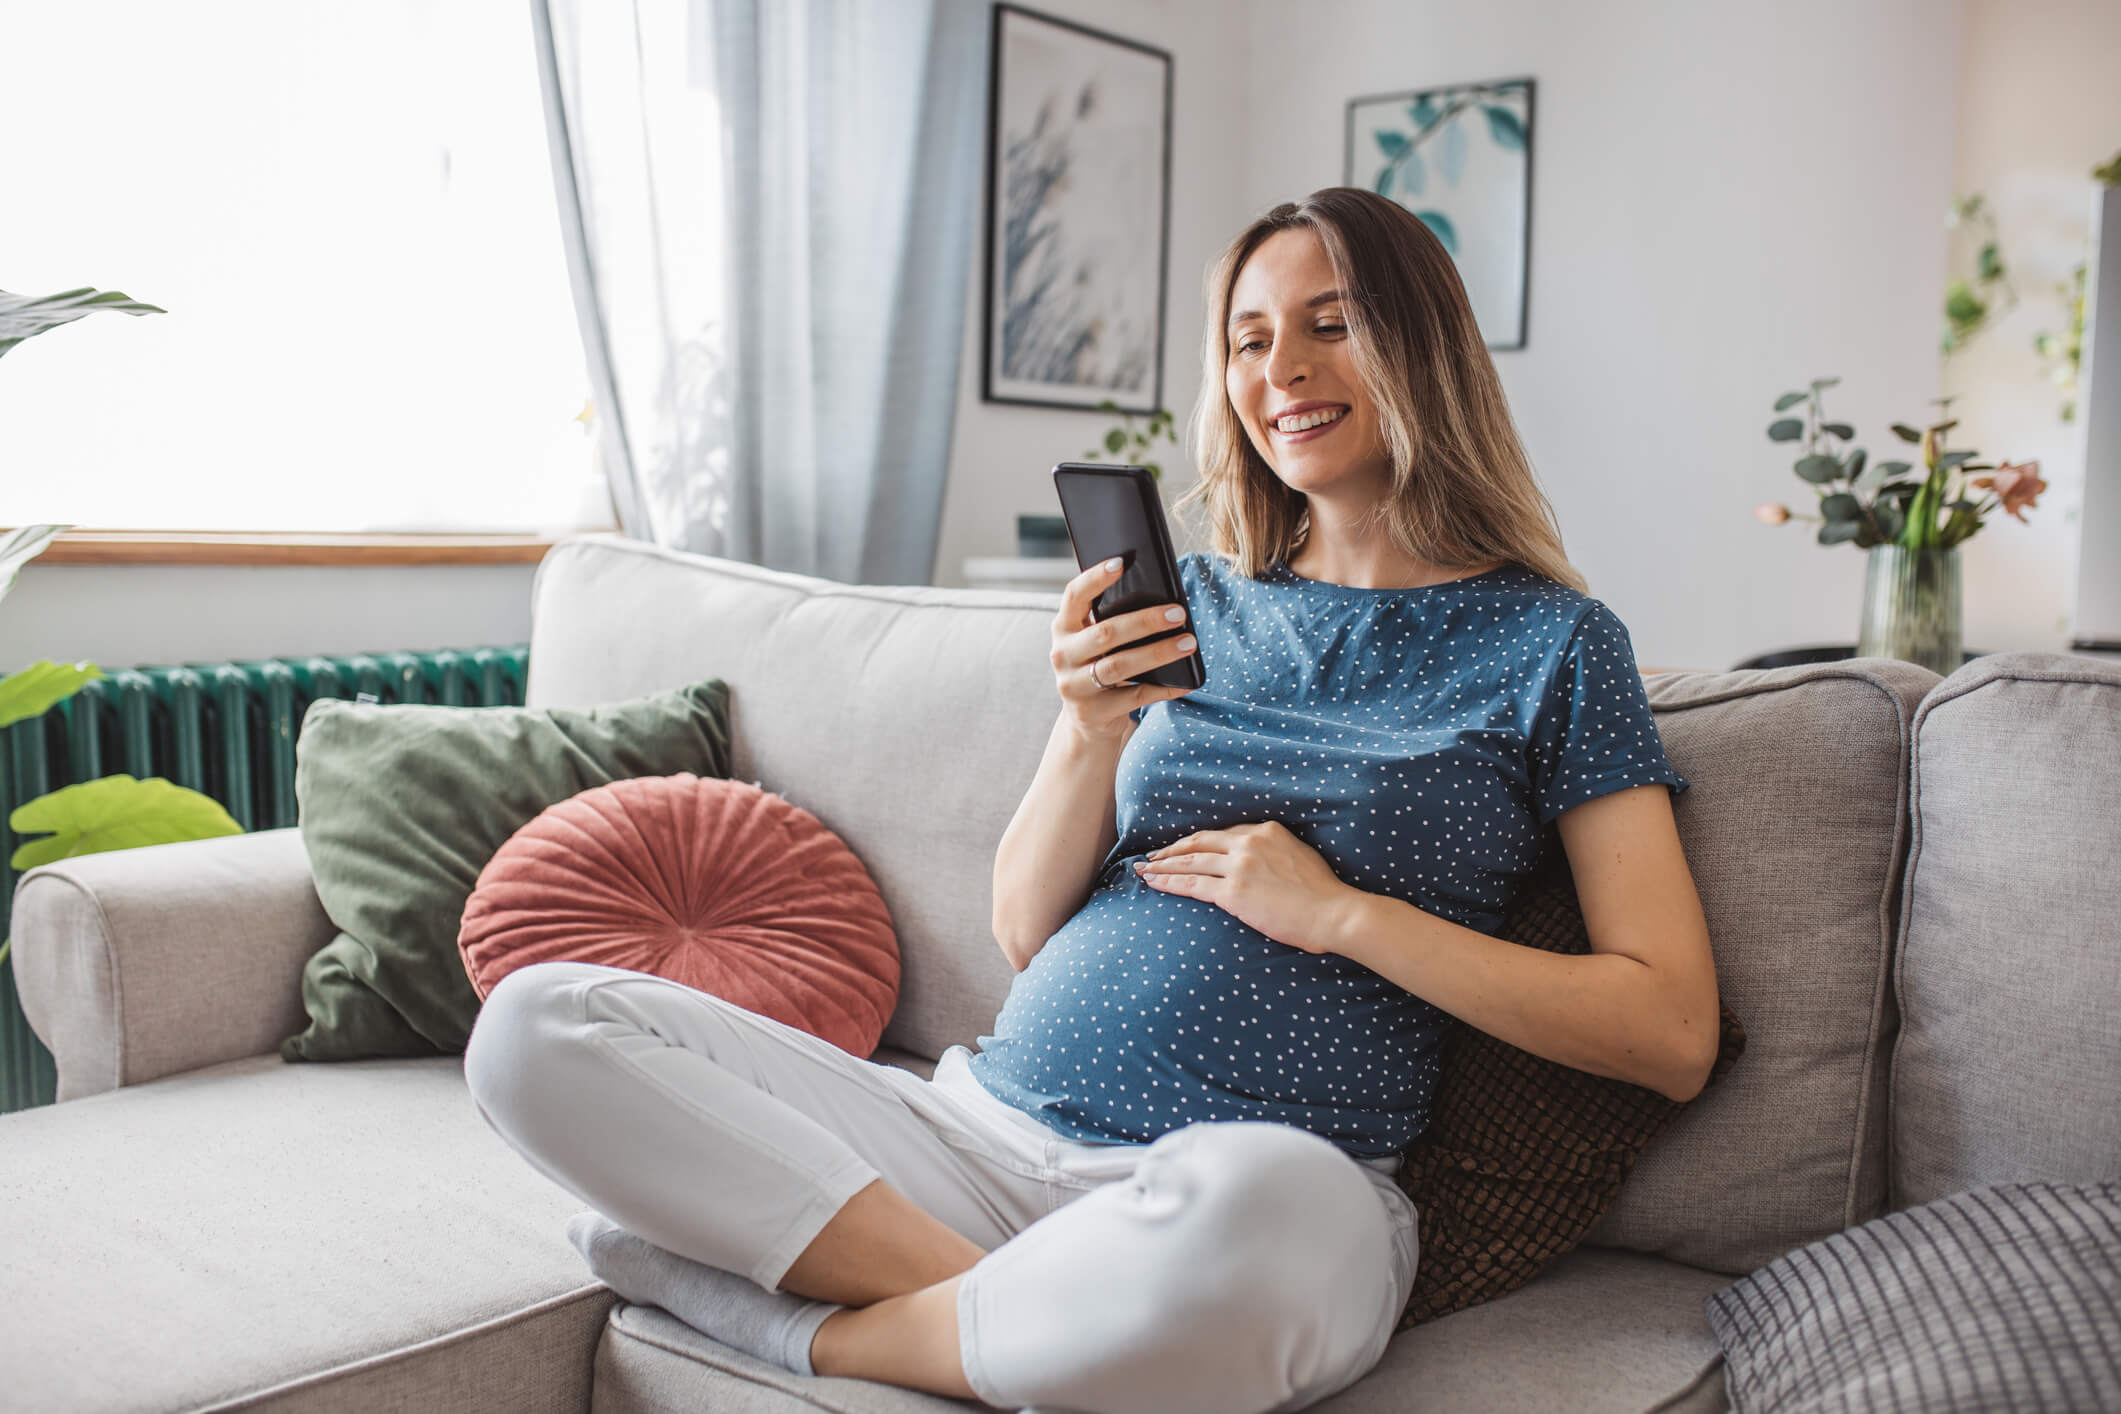 Pregnant women reads adoption information on her phone